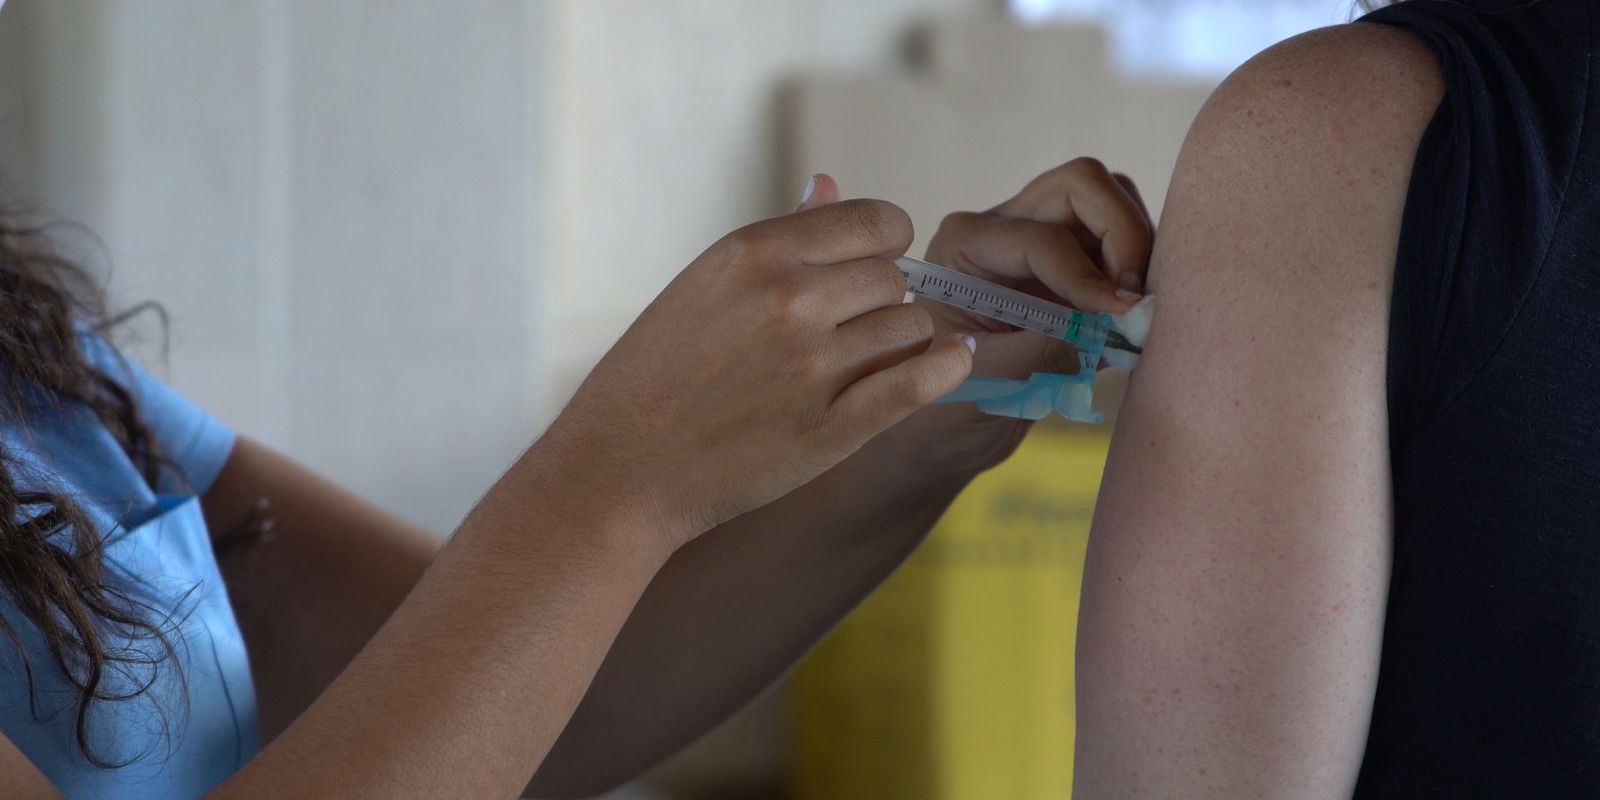 Ministry of Economy will release R$ 1.4 billion for the purchase of vaccines